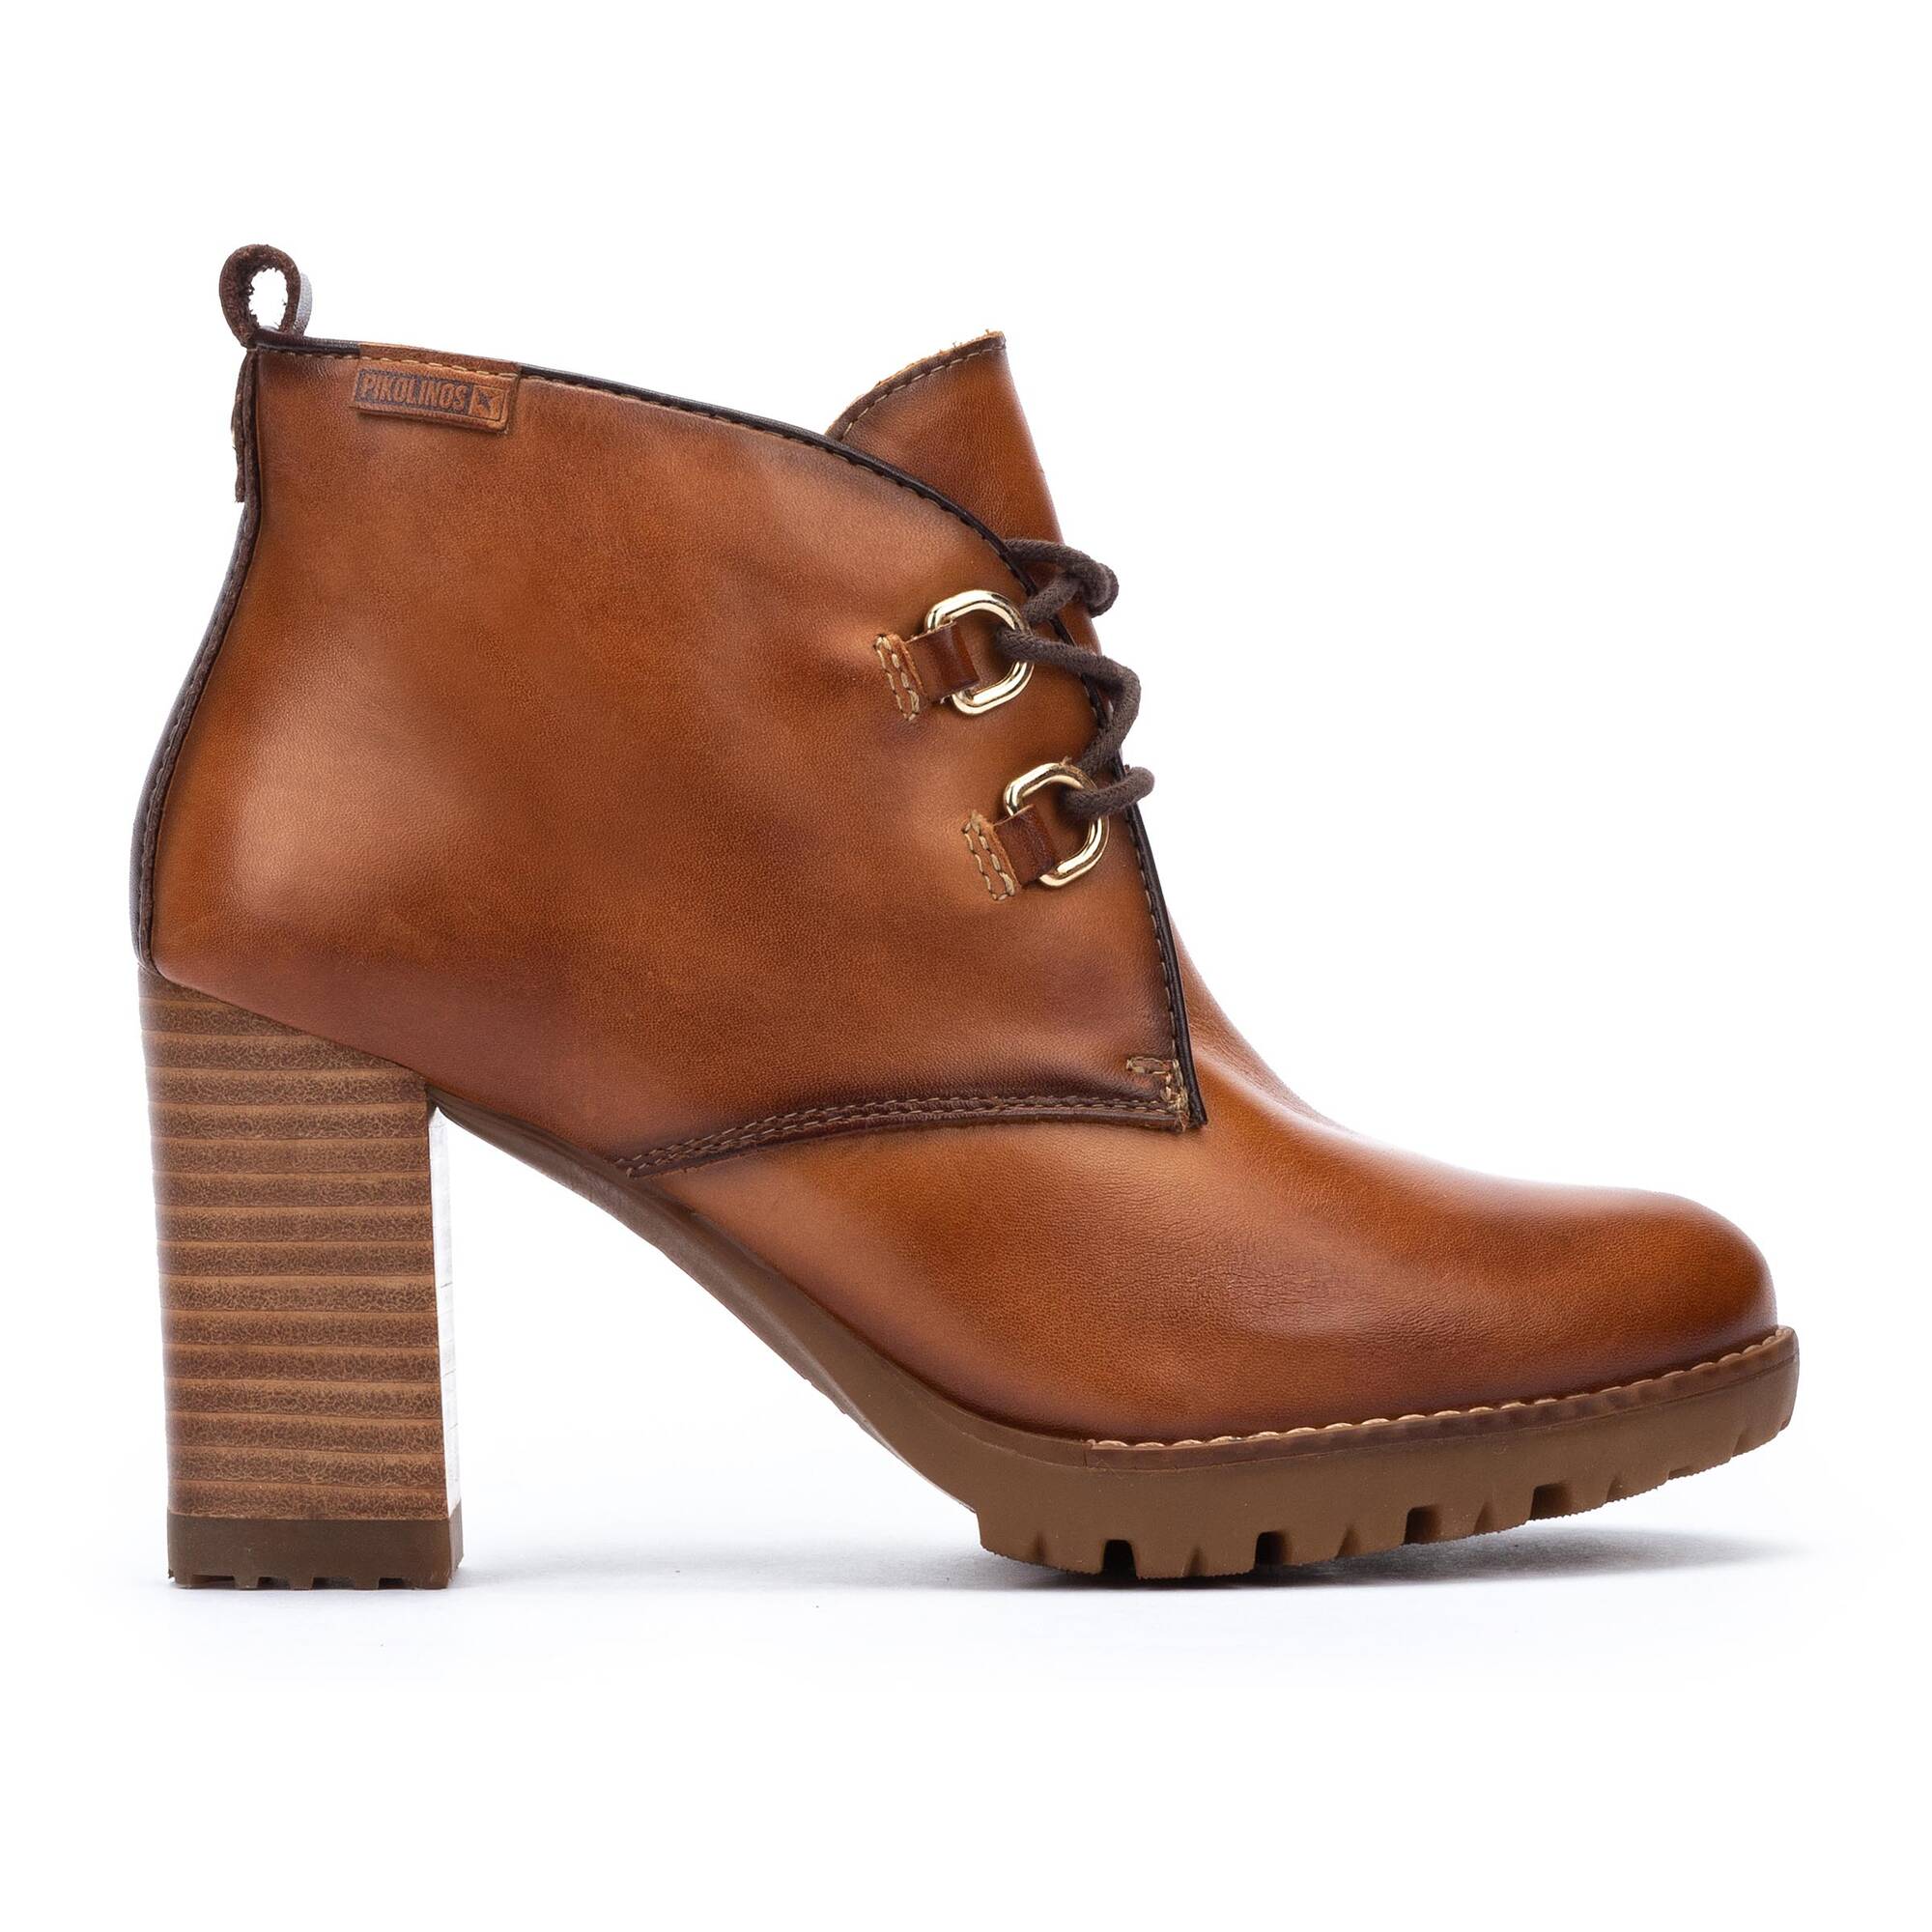 Absatzschuhe | CONNELLY W7M-7562C1, BRANDY, large image number 10 | null